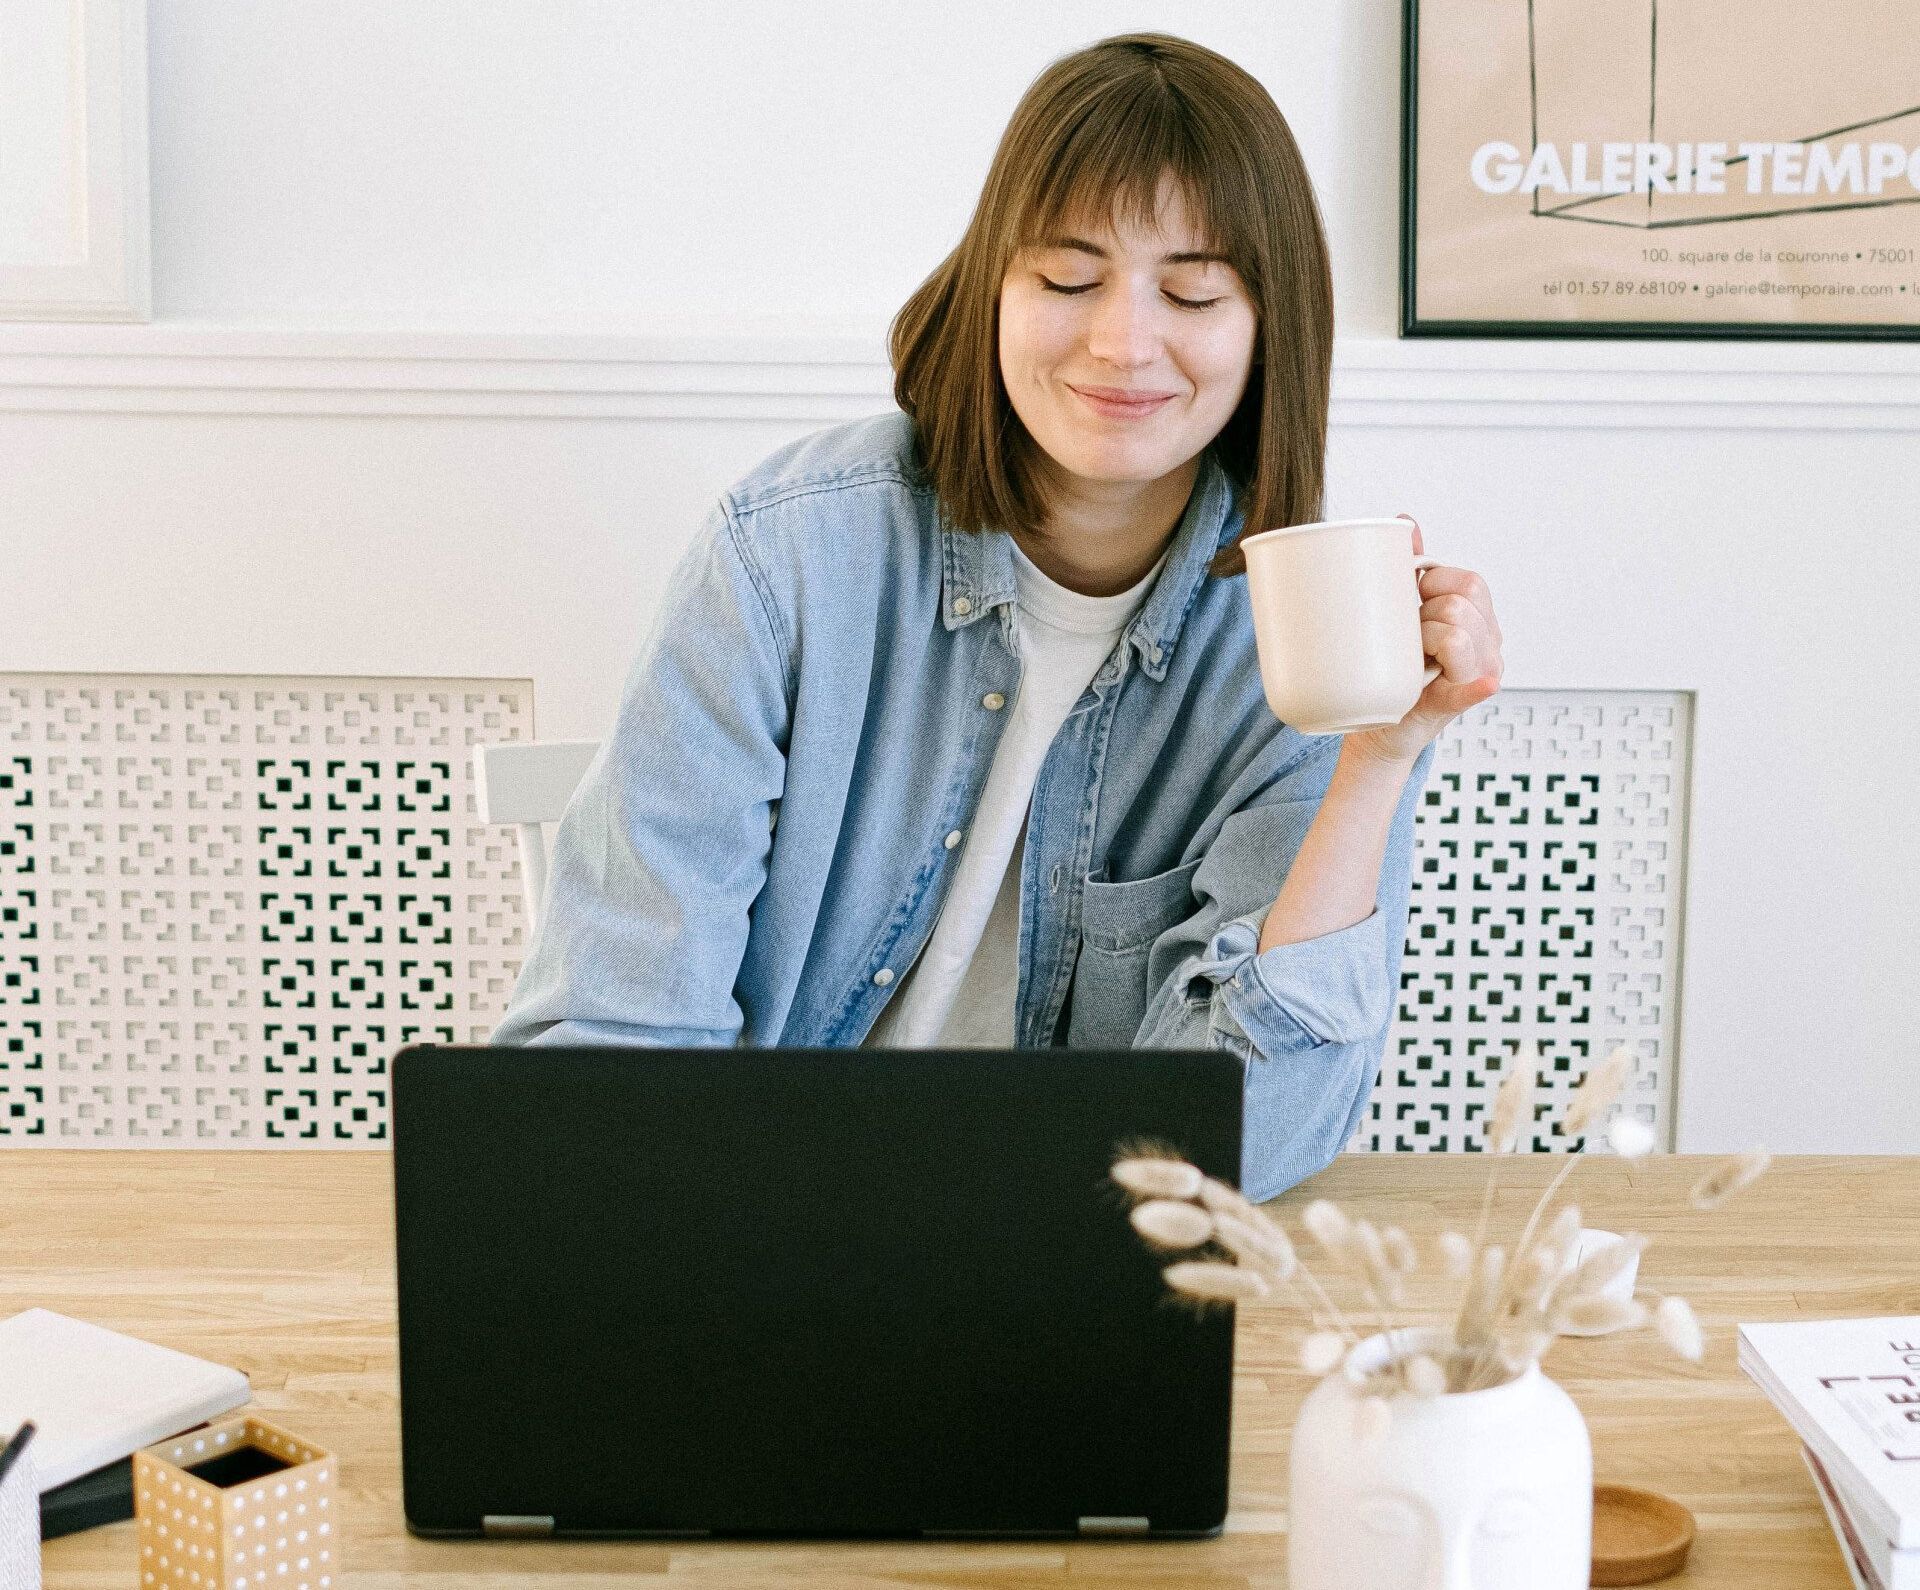 Smiling woman on laptop drinking coffee out of a white mug